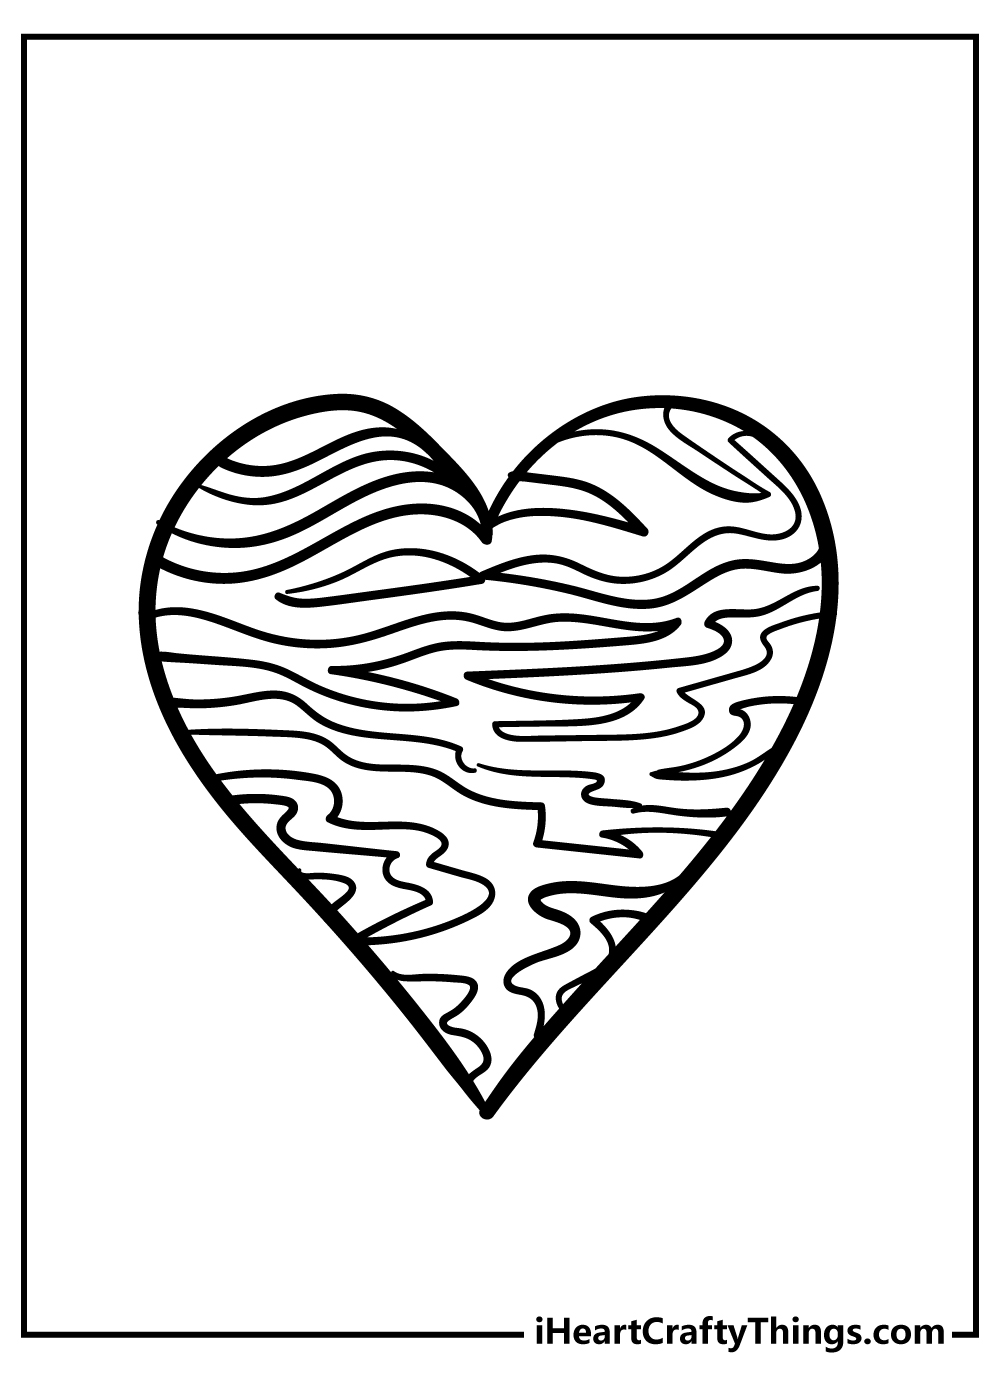 Heart coloring pages free printable